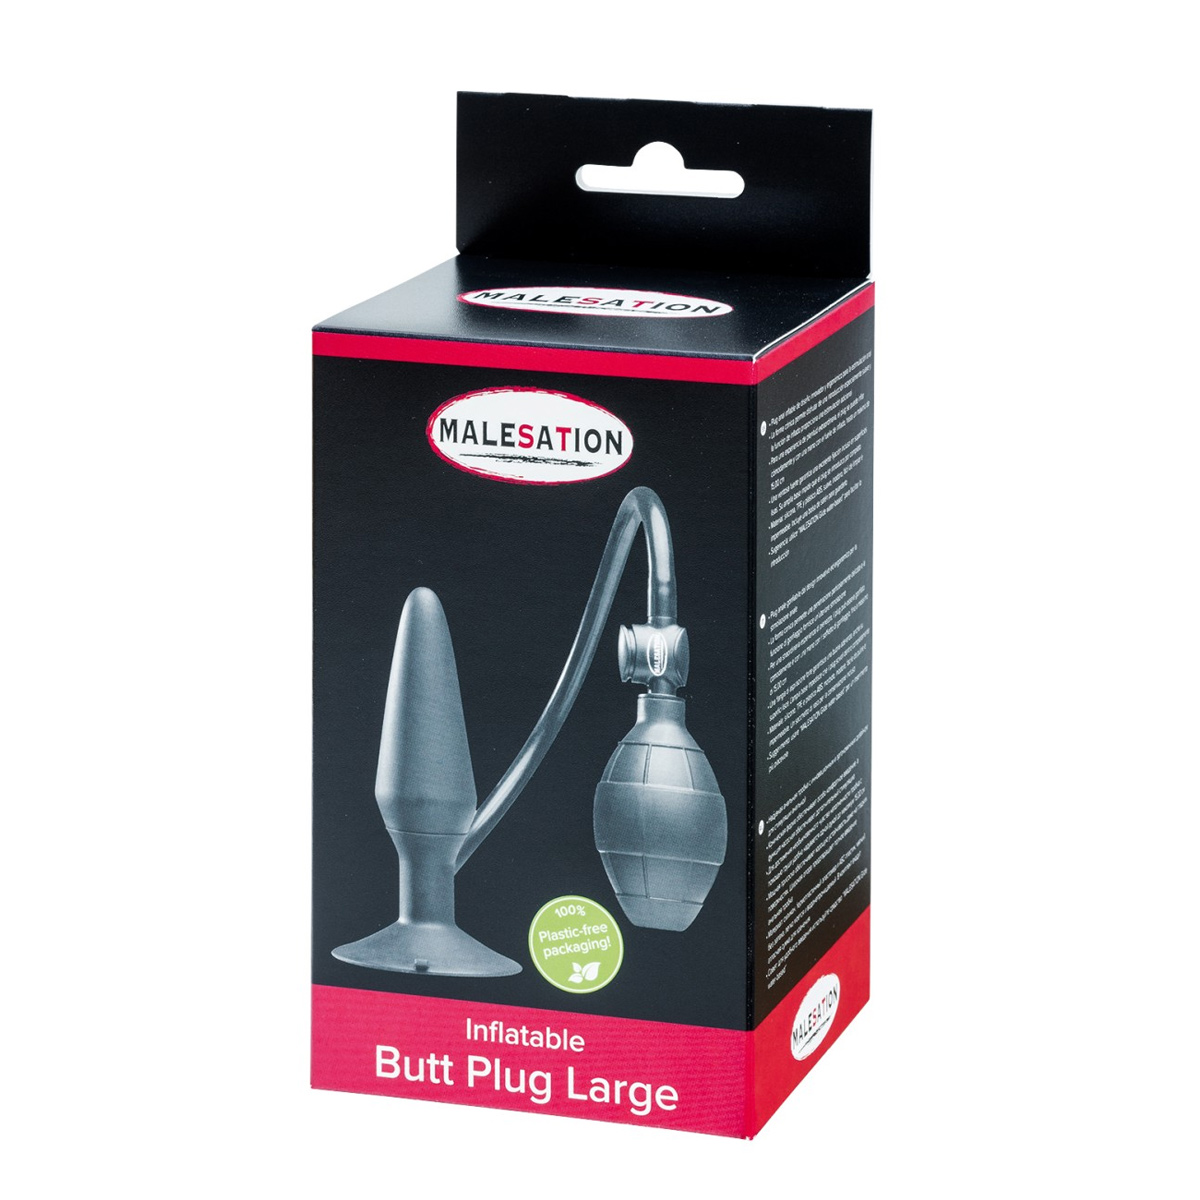 Malesation-Inflatable-Butt-Plug-Large-OPR-3500011-2